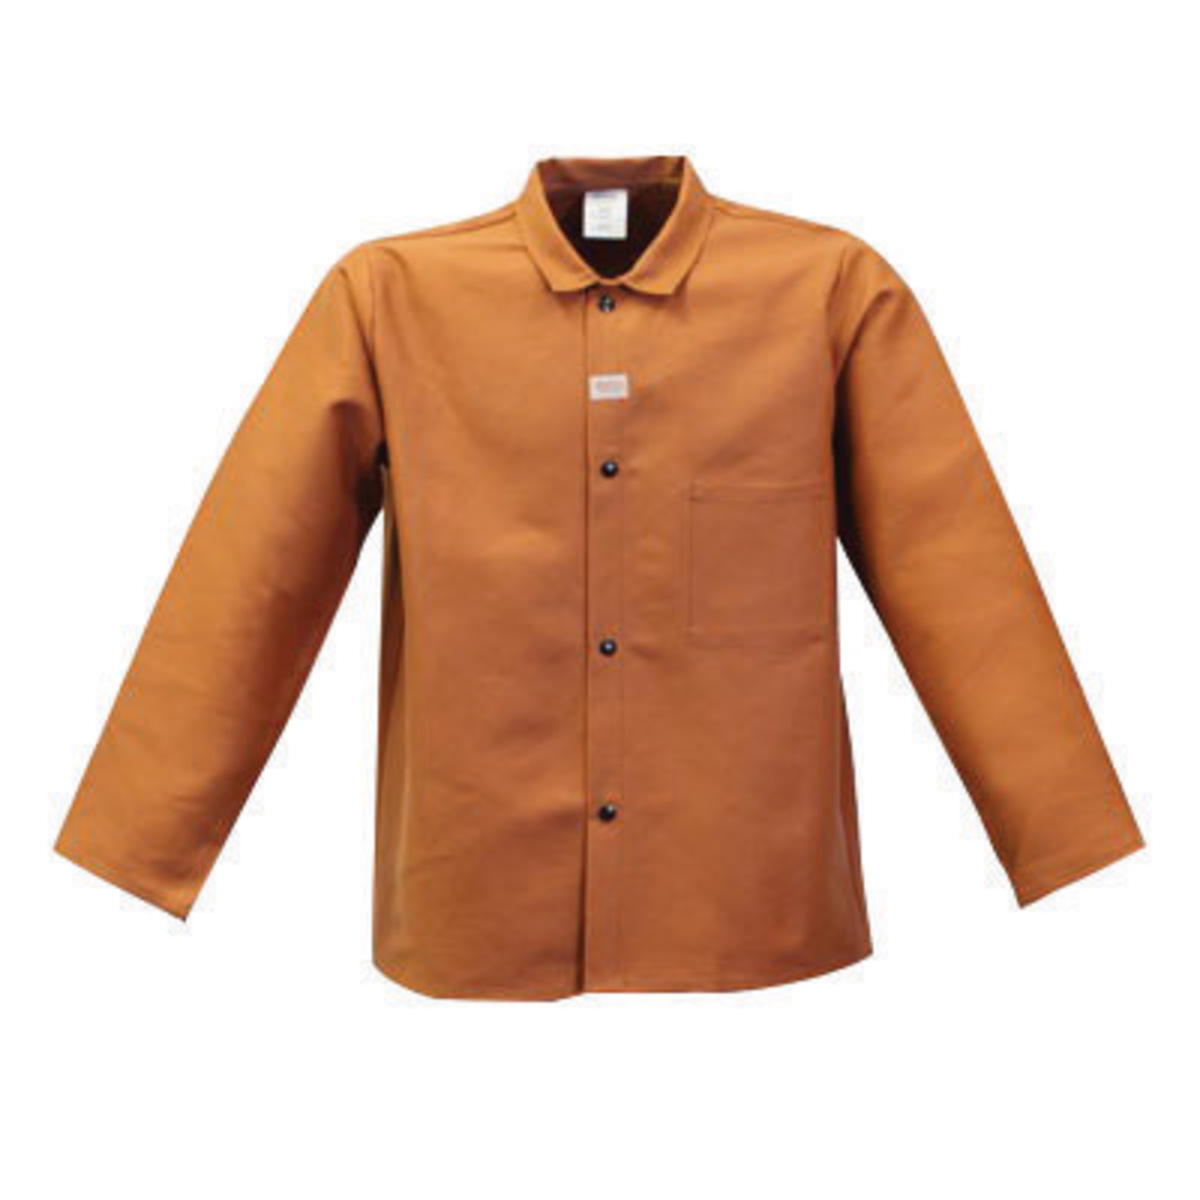 Stanco Safety Products™ X-Large Rust Brown Cotton Flame Resistant Welding Jacket With Snap Closure